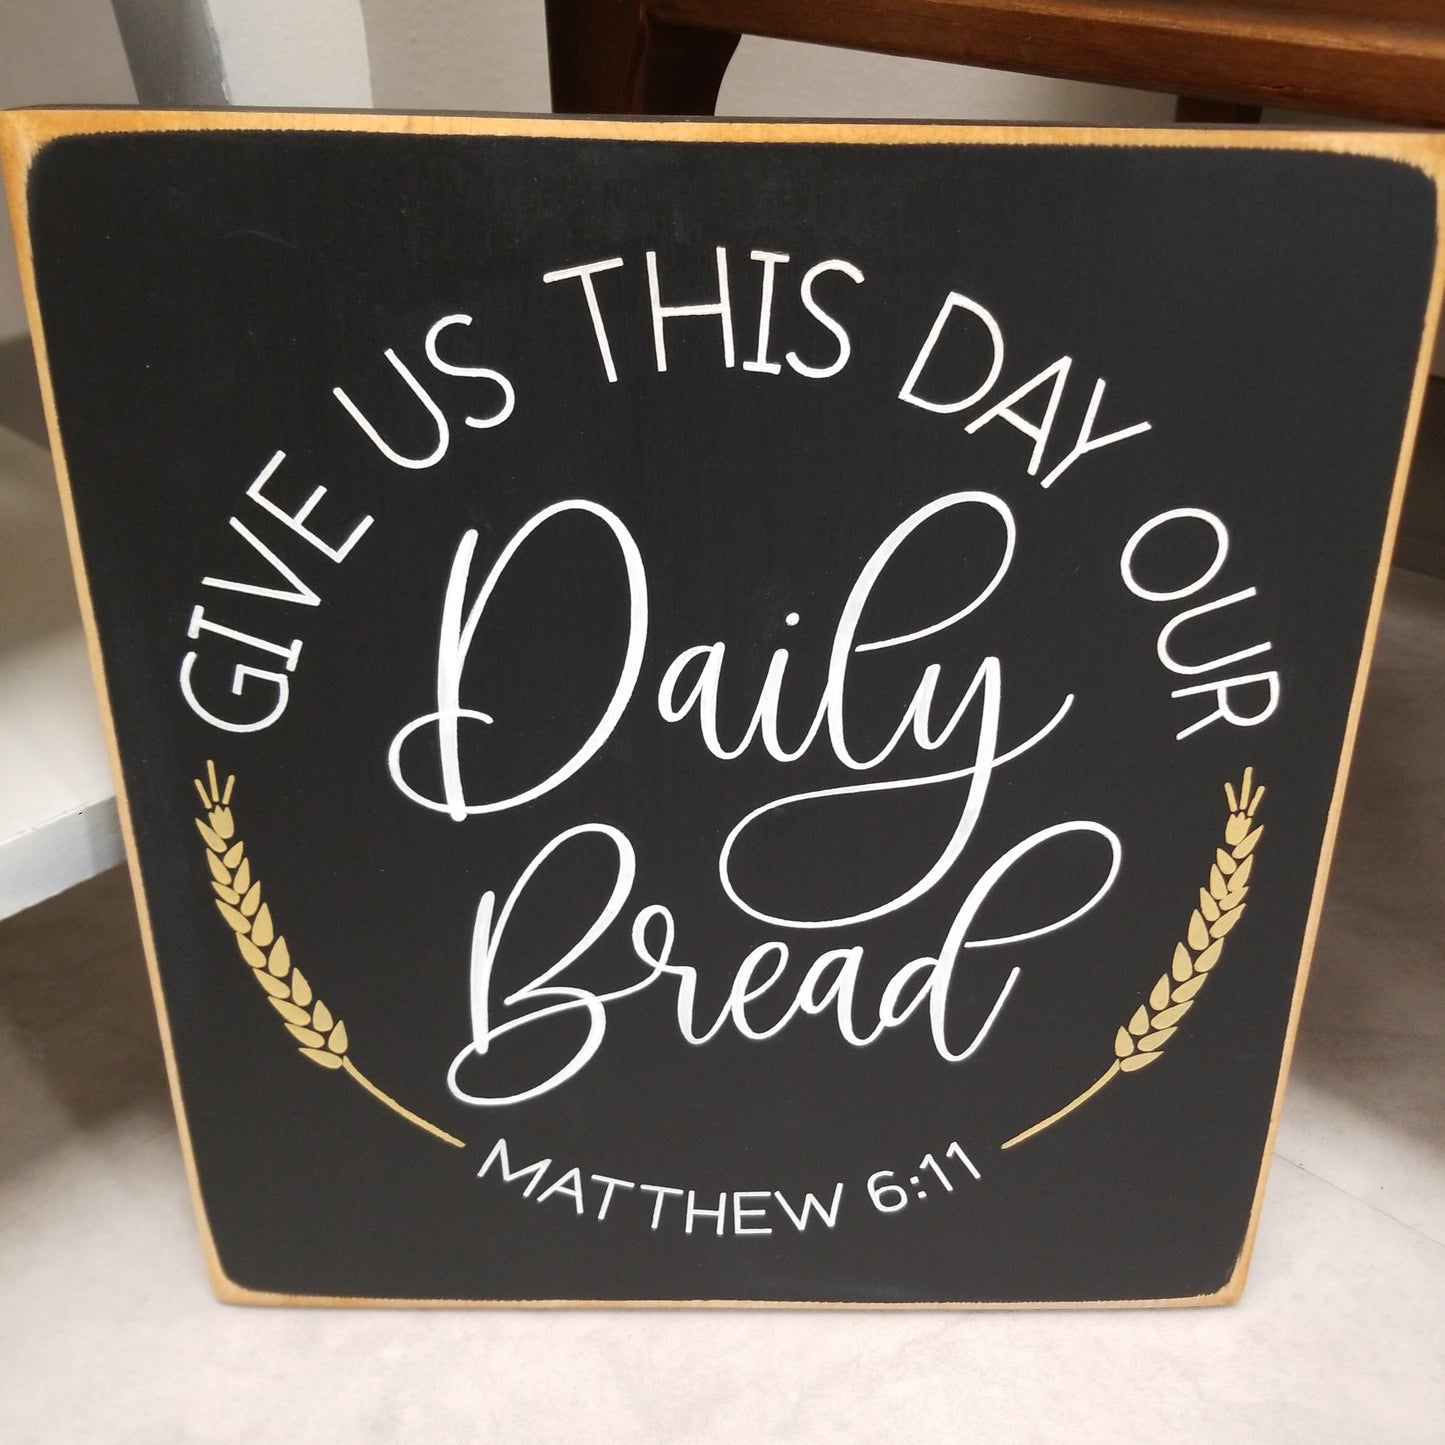 Give Us This Day Our Daily Bread Wooden Sign